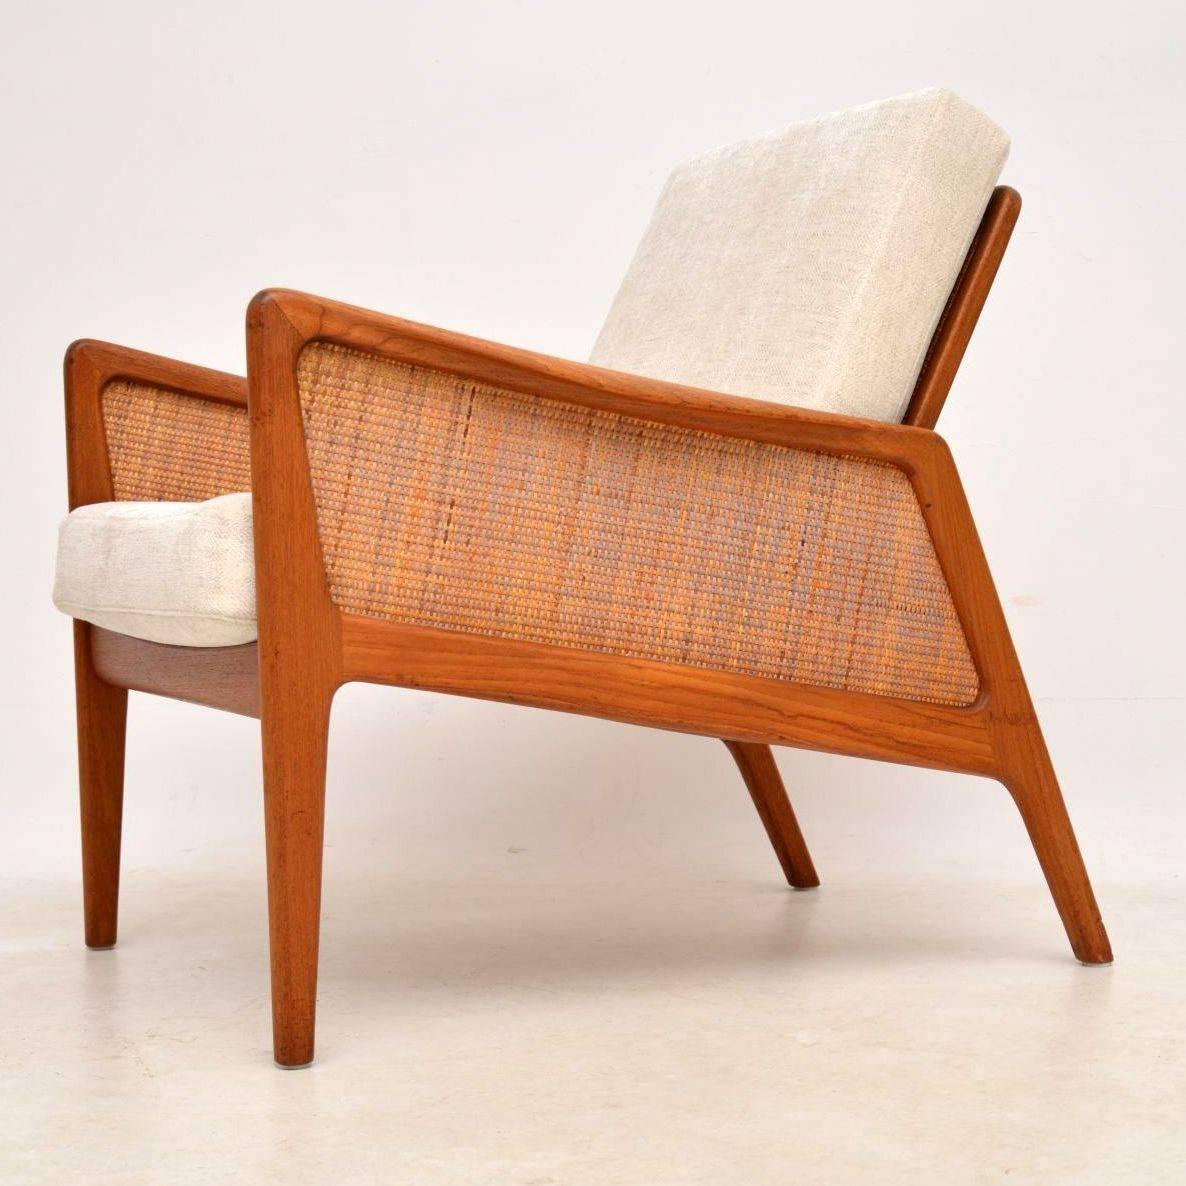 A stunning and very rare Danish vintage teak armchair, this was designed by Peter Hvidt and Orla Mølgaard-Nielsen. It was made by France and Daverkosen and it has the original badge intact, which means it can be dated to somewhere between 1953 and